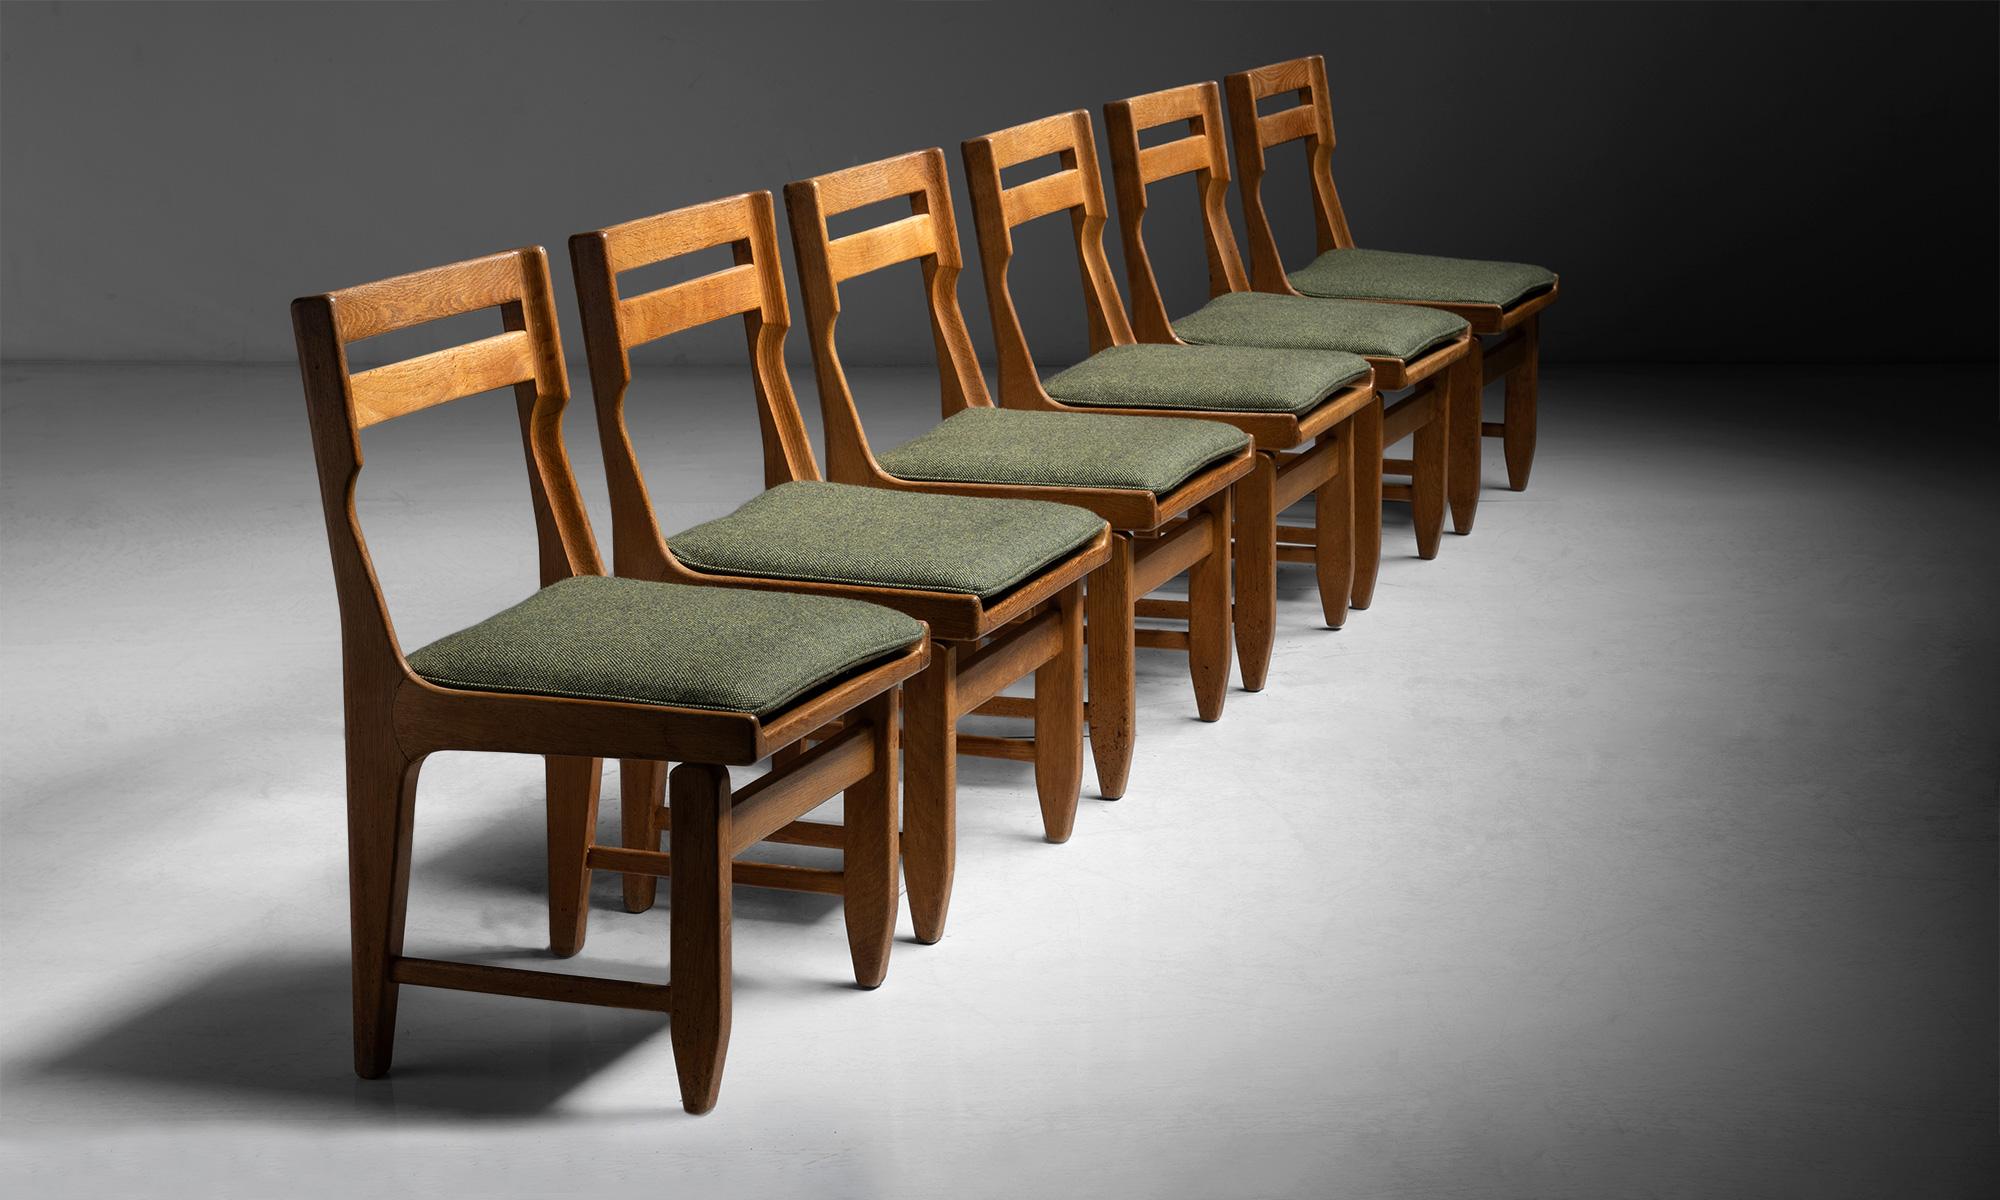 Set of (6) Oak dining chairs by Guillerme et Chambron

France circa 1960

Vintage frame with seat pads newly upholstered.

Measures: 19.25